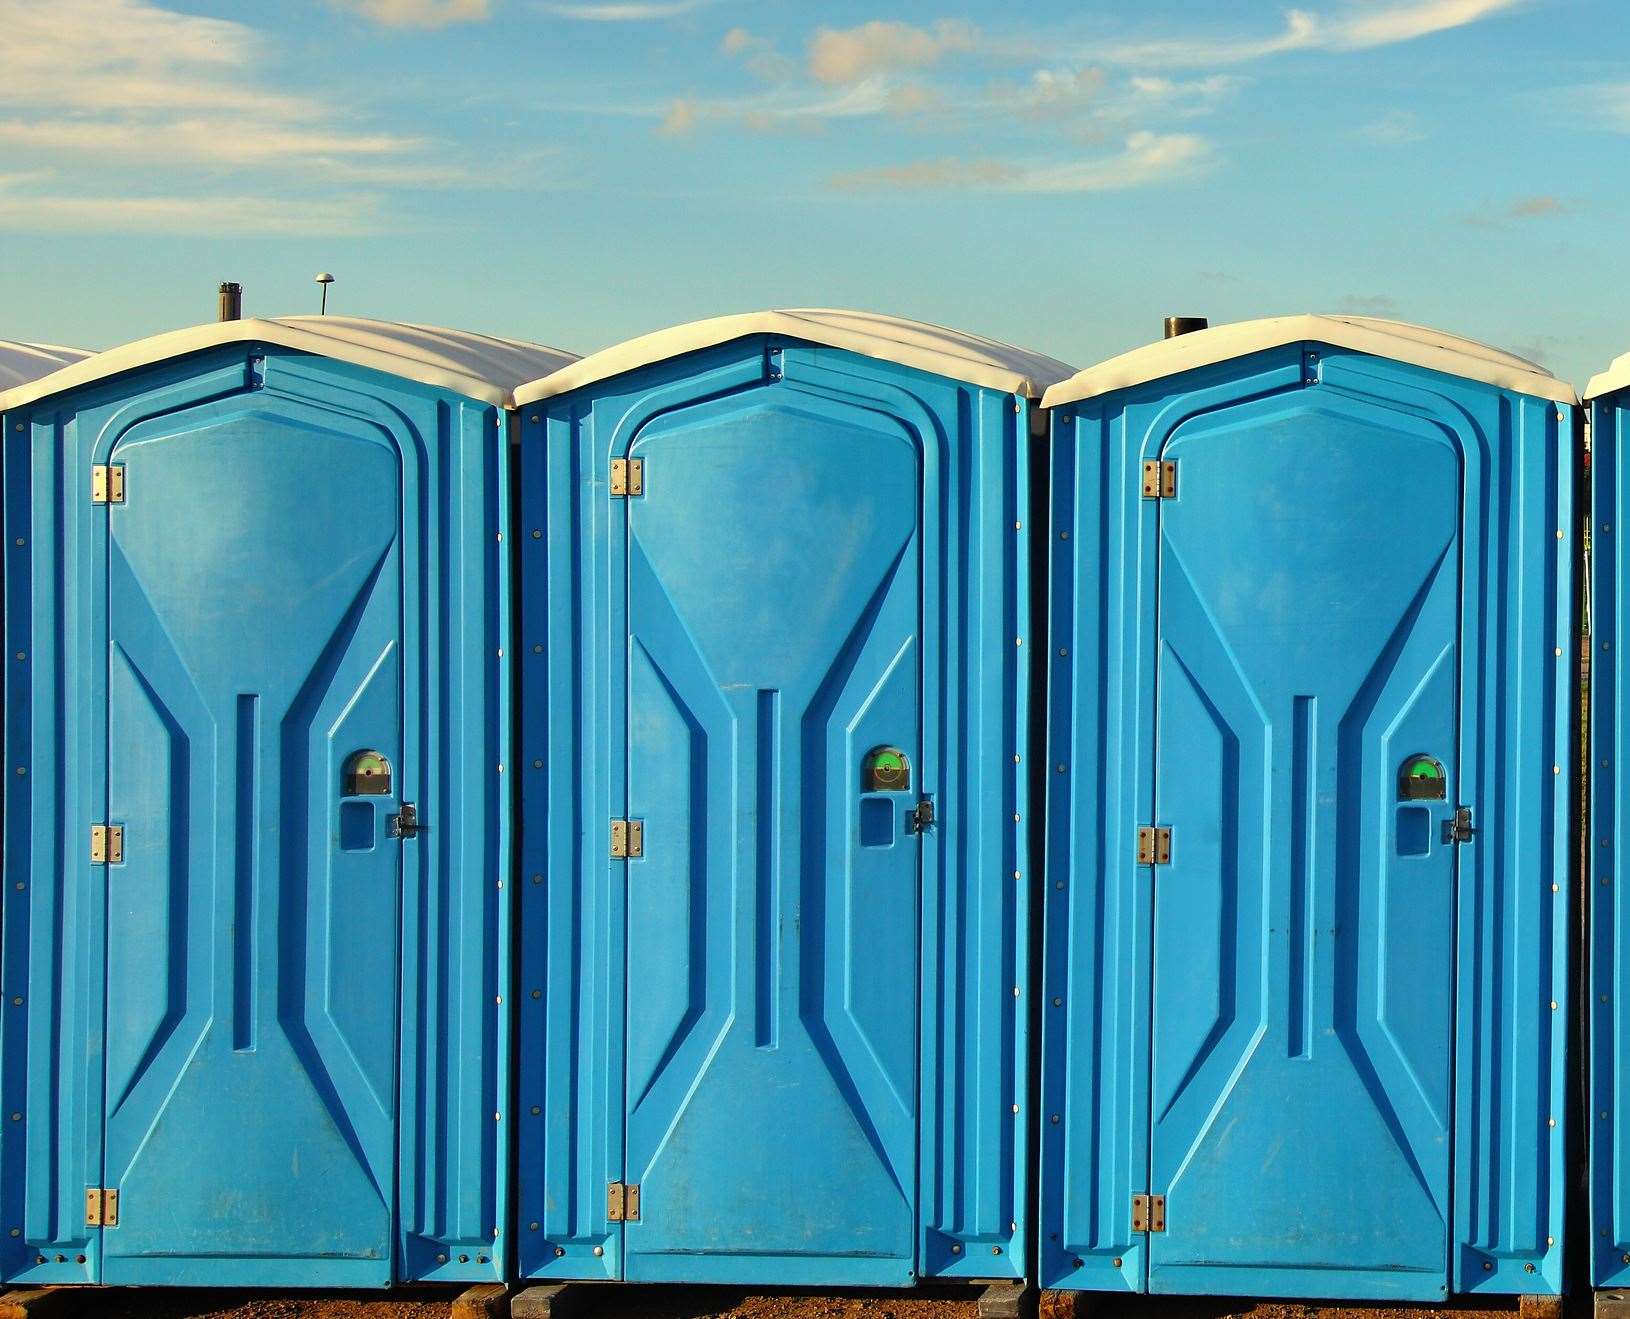 The government has said it will line the A20 and M20 with portable toilets for lorry drivers before December 31